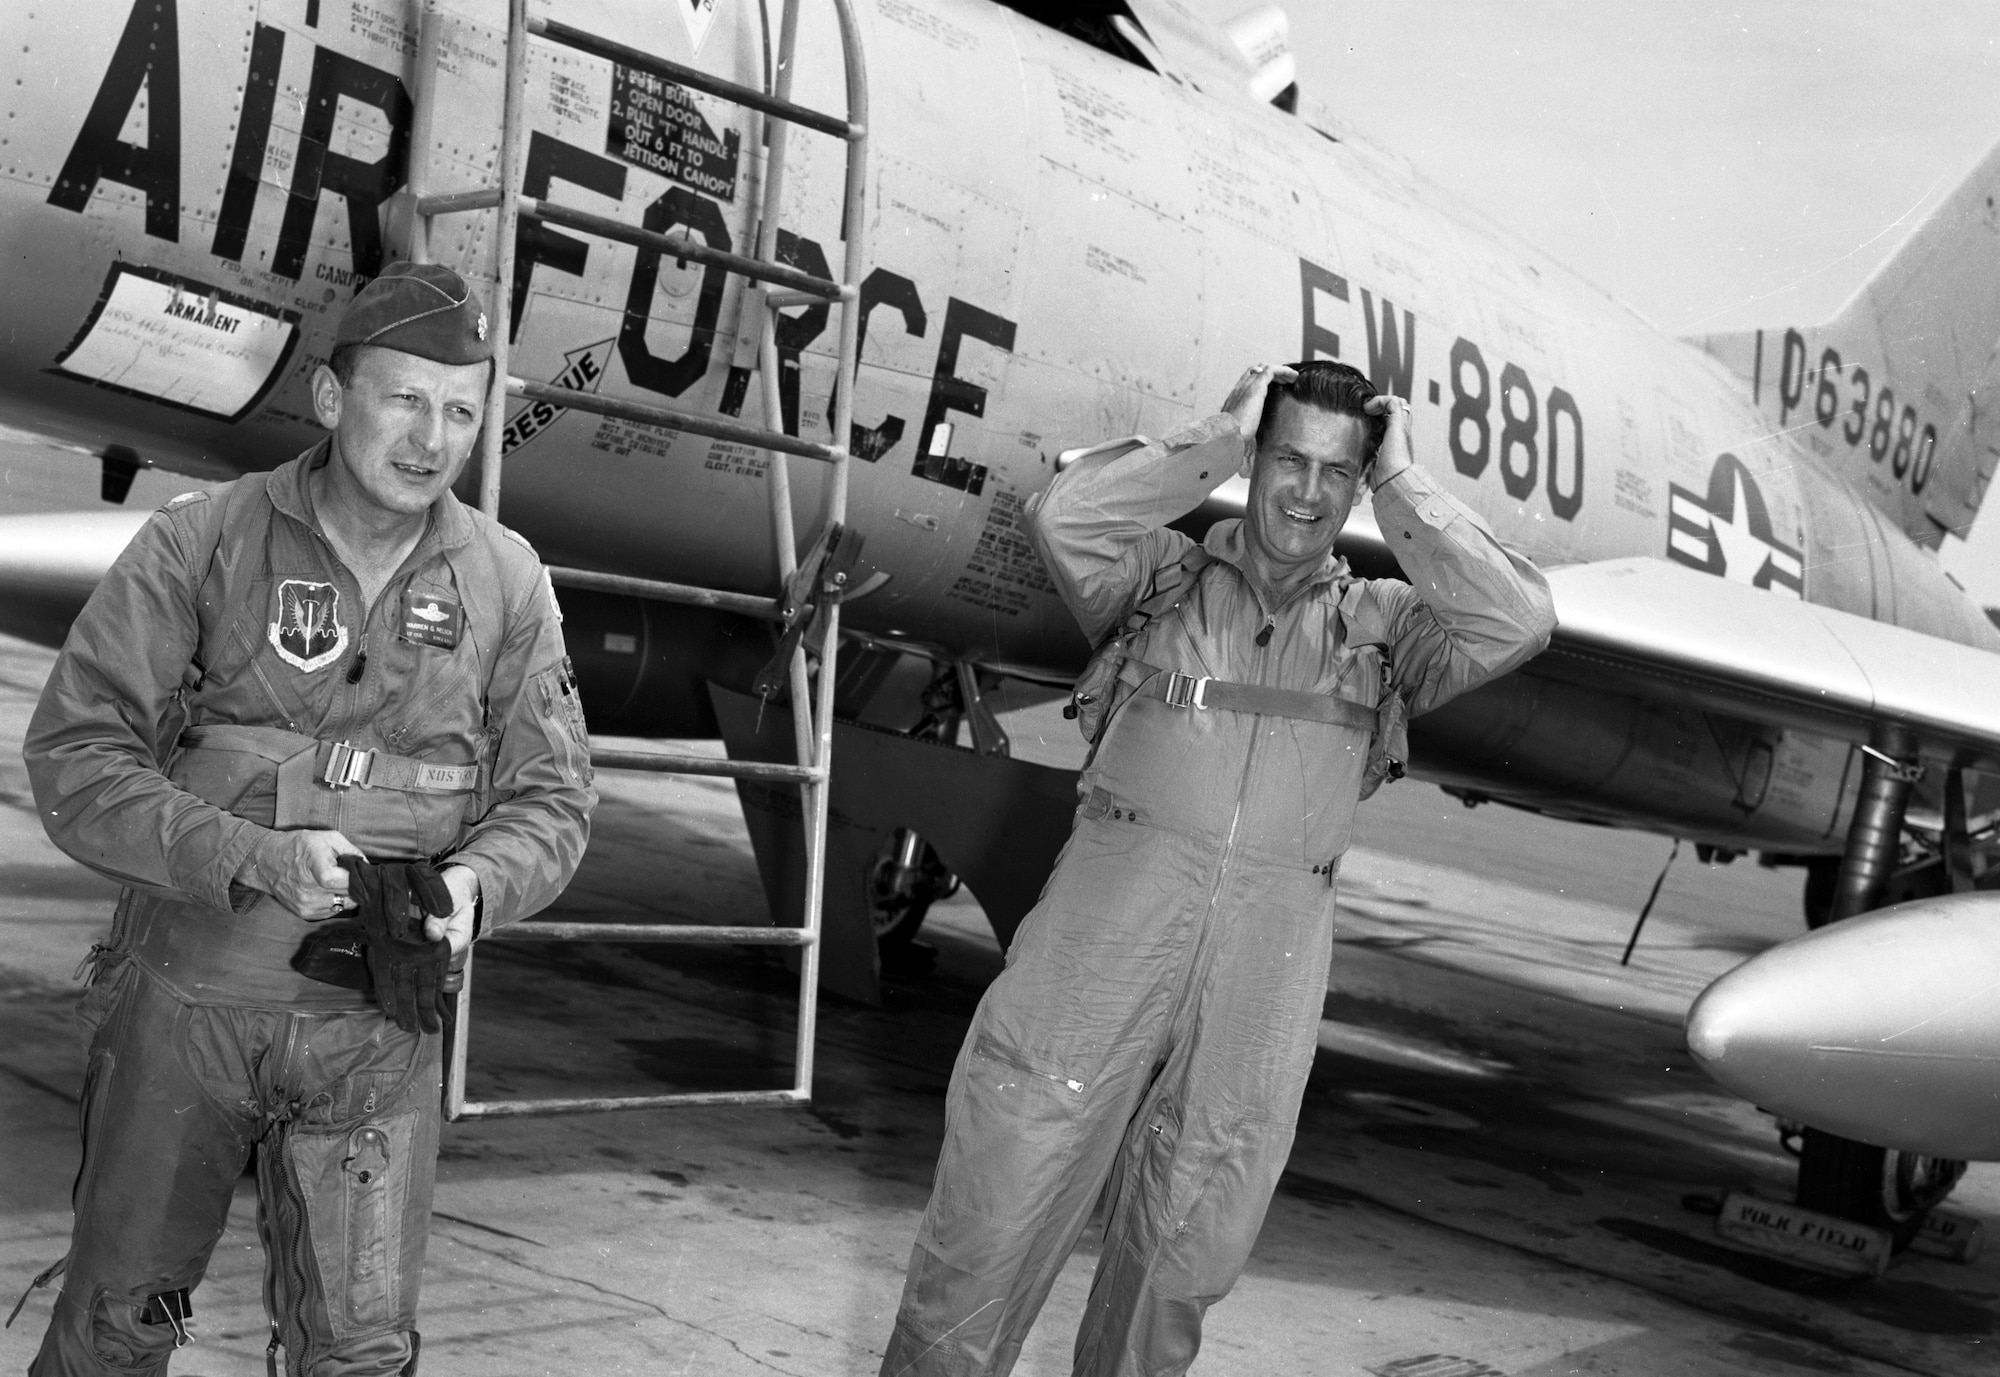 Lt. Col. Warren G. Nelson, 185th Tactical Fighter Group, along with Iowa Governor Harold Hughes, step off an Iowa Air National Guard F-100F at the Volk Filed Combat Readiness Training Center in Wisconsin on July 22, 1966. Hughes was treated to a backseat ride in the two seat training model of the F-100, tail number 880, while it was assigned to the Iowa National Guard’s 185th Fighter Group in Sioux City, Iowa.
U.S. Air National Guard Photo by Airman 1st Class Dwain Volwieler 185th TFG Photographer